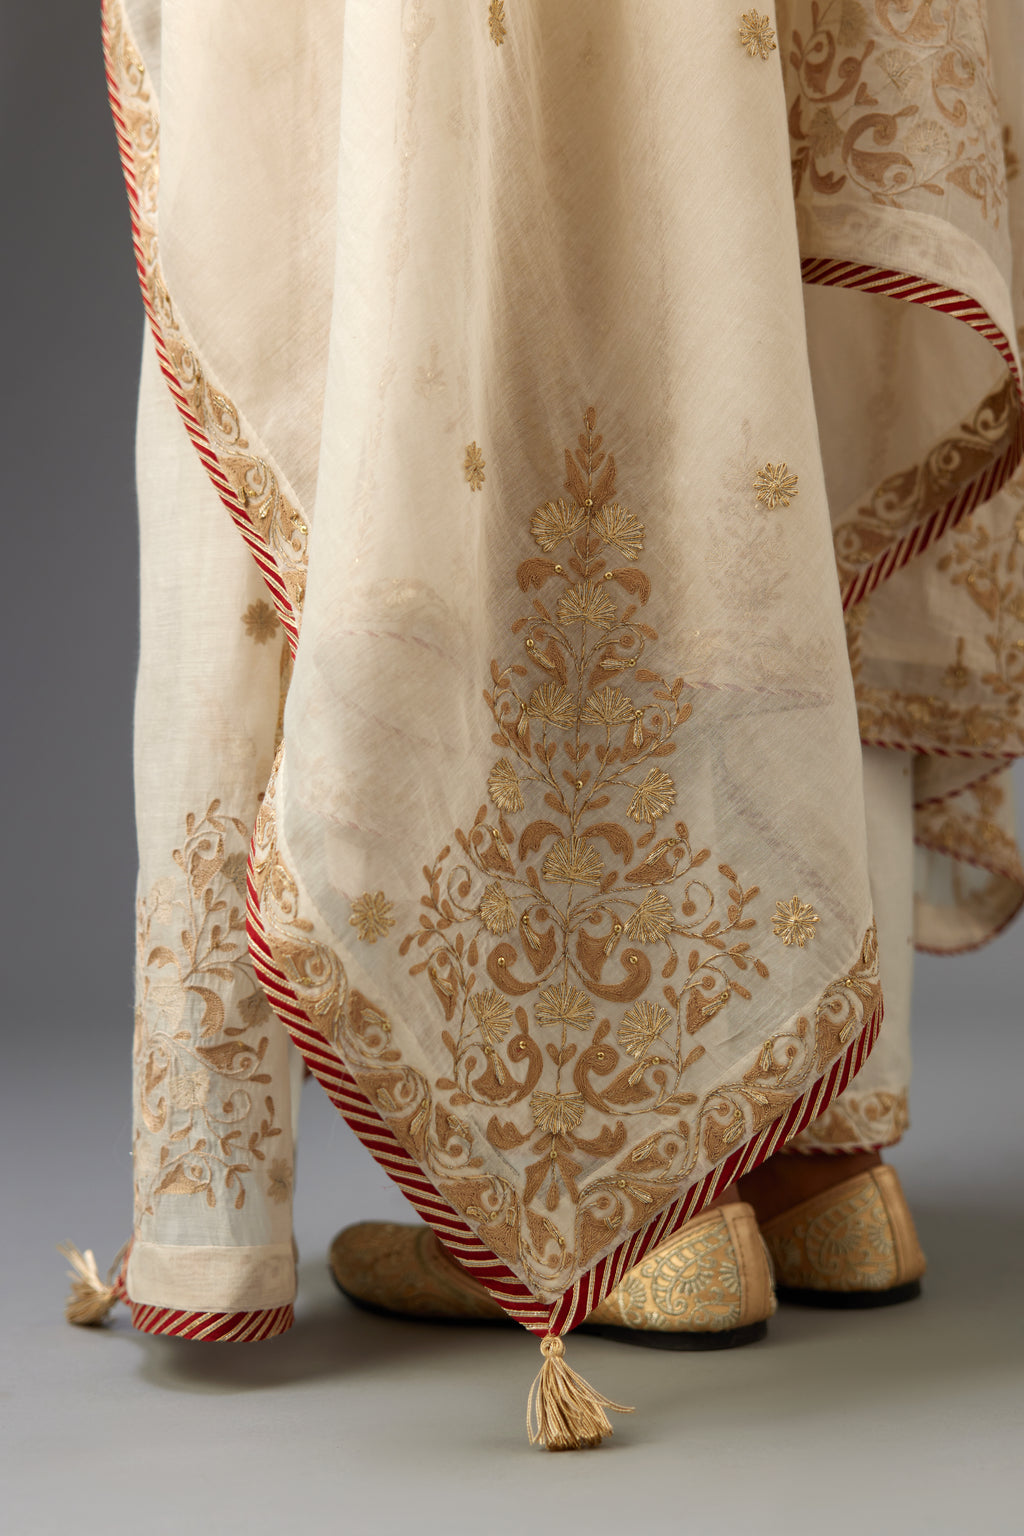 Off-white cotton chanderi dupatta with dori and gota embroidery at edges, highlighted with gold sequins.